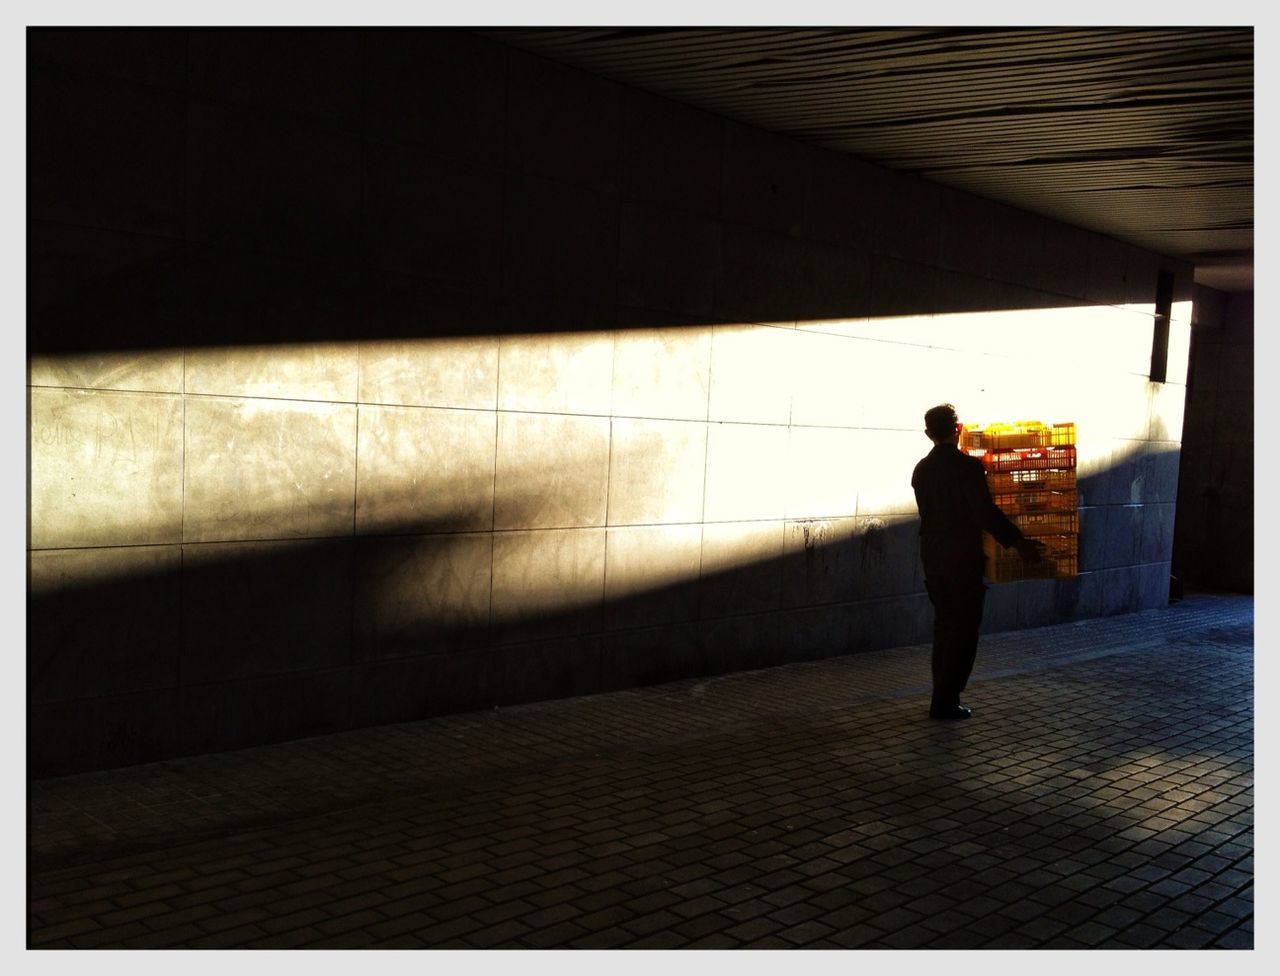 Silhouette man carrying crate in tunnel